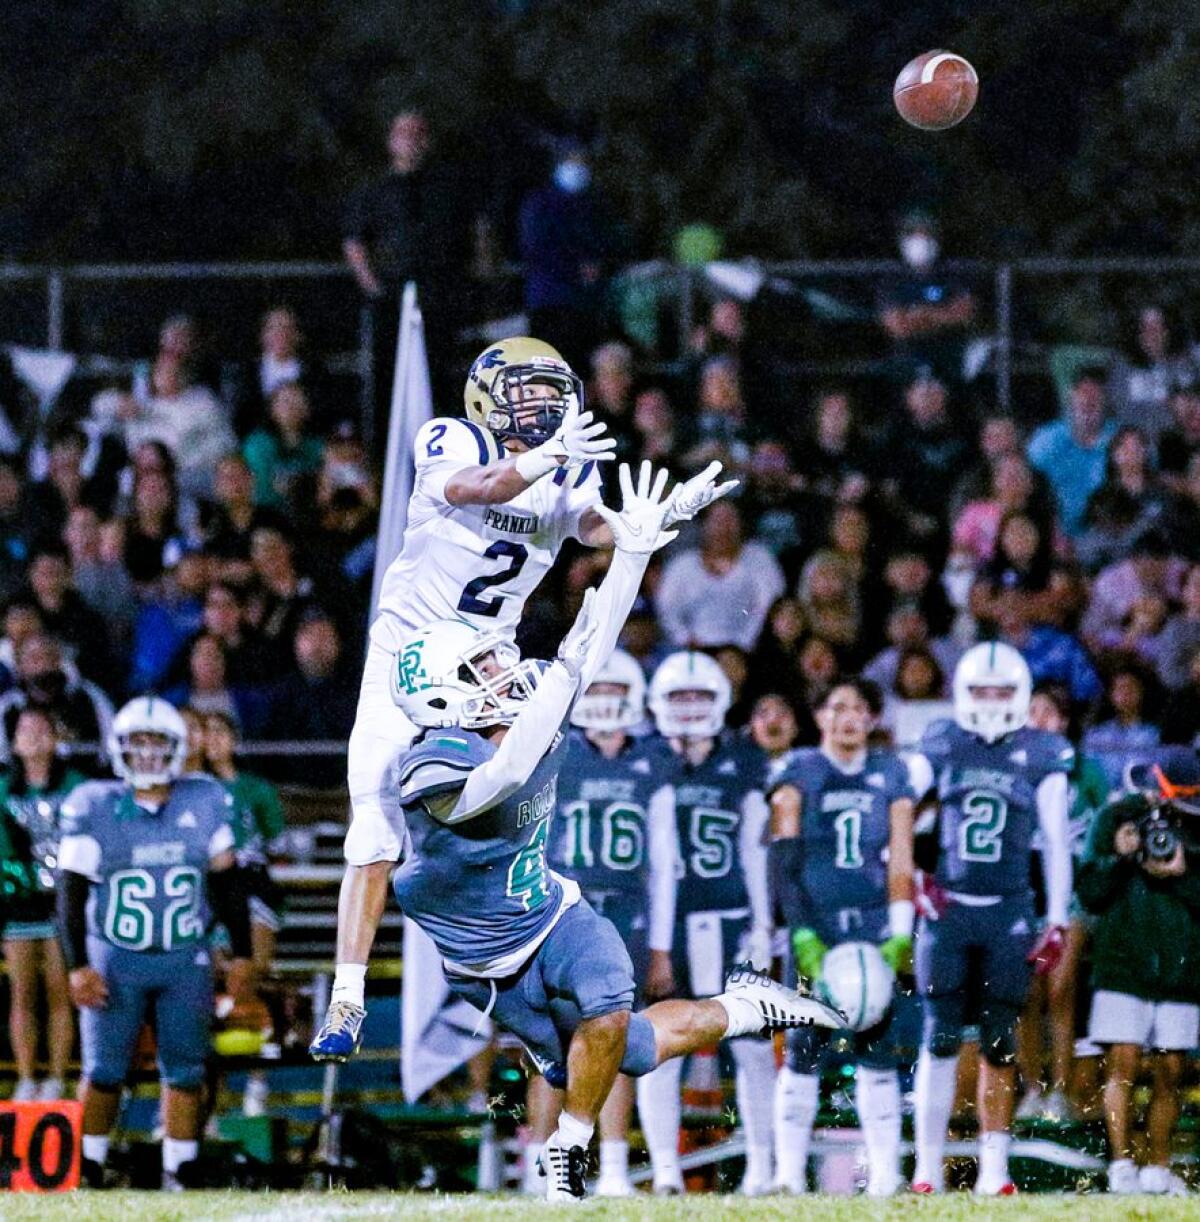 Hector Ceballos of Franklin leaps over Anthony Leon-Vidales of Eagle Rock to make a 42-yard catch.